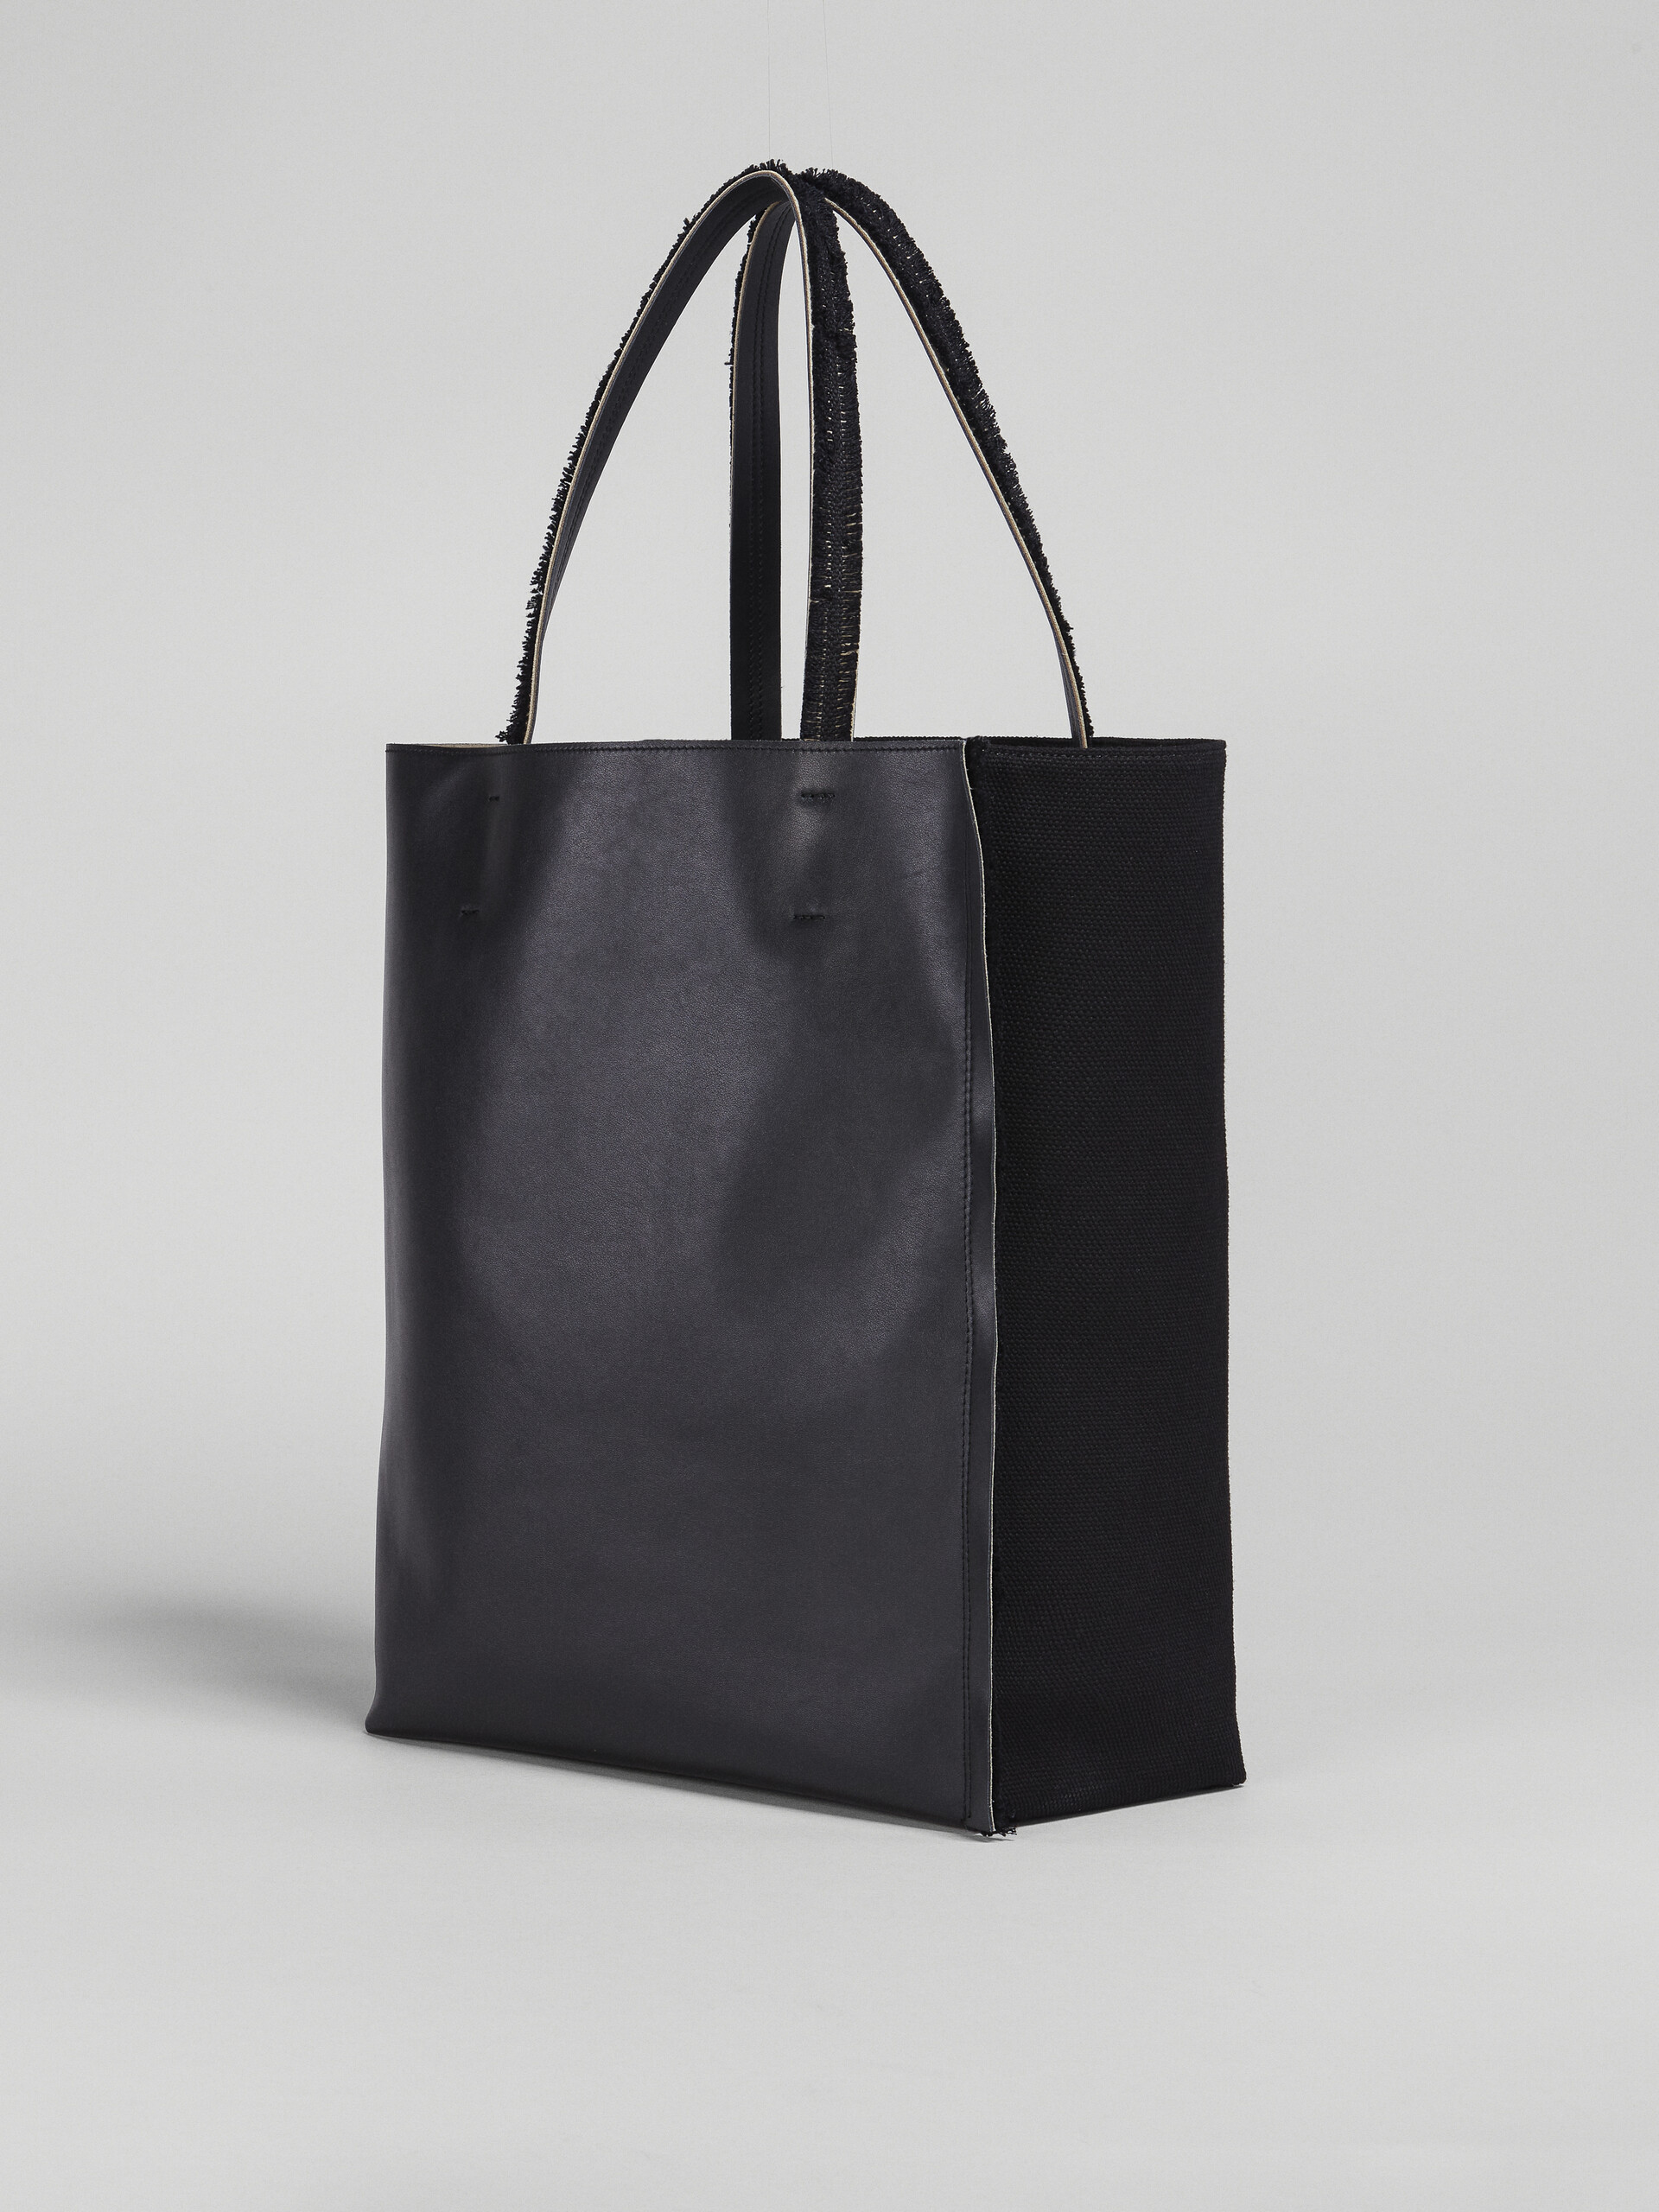 Black leather and canvas MUSEO SOFT shopping bag - Shopping Bags - Image 3